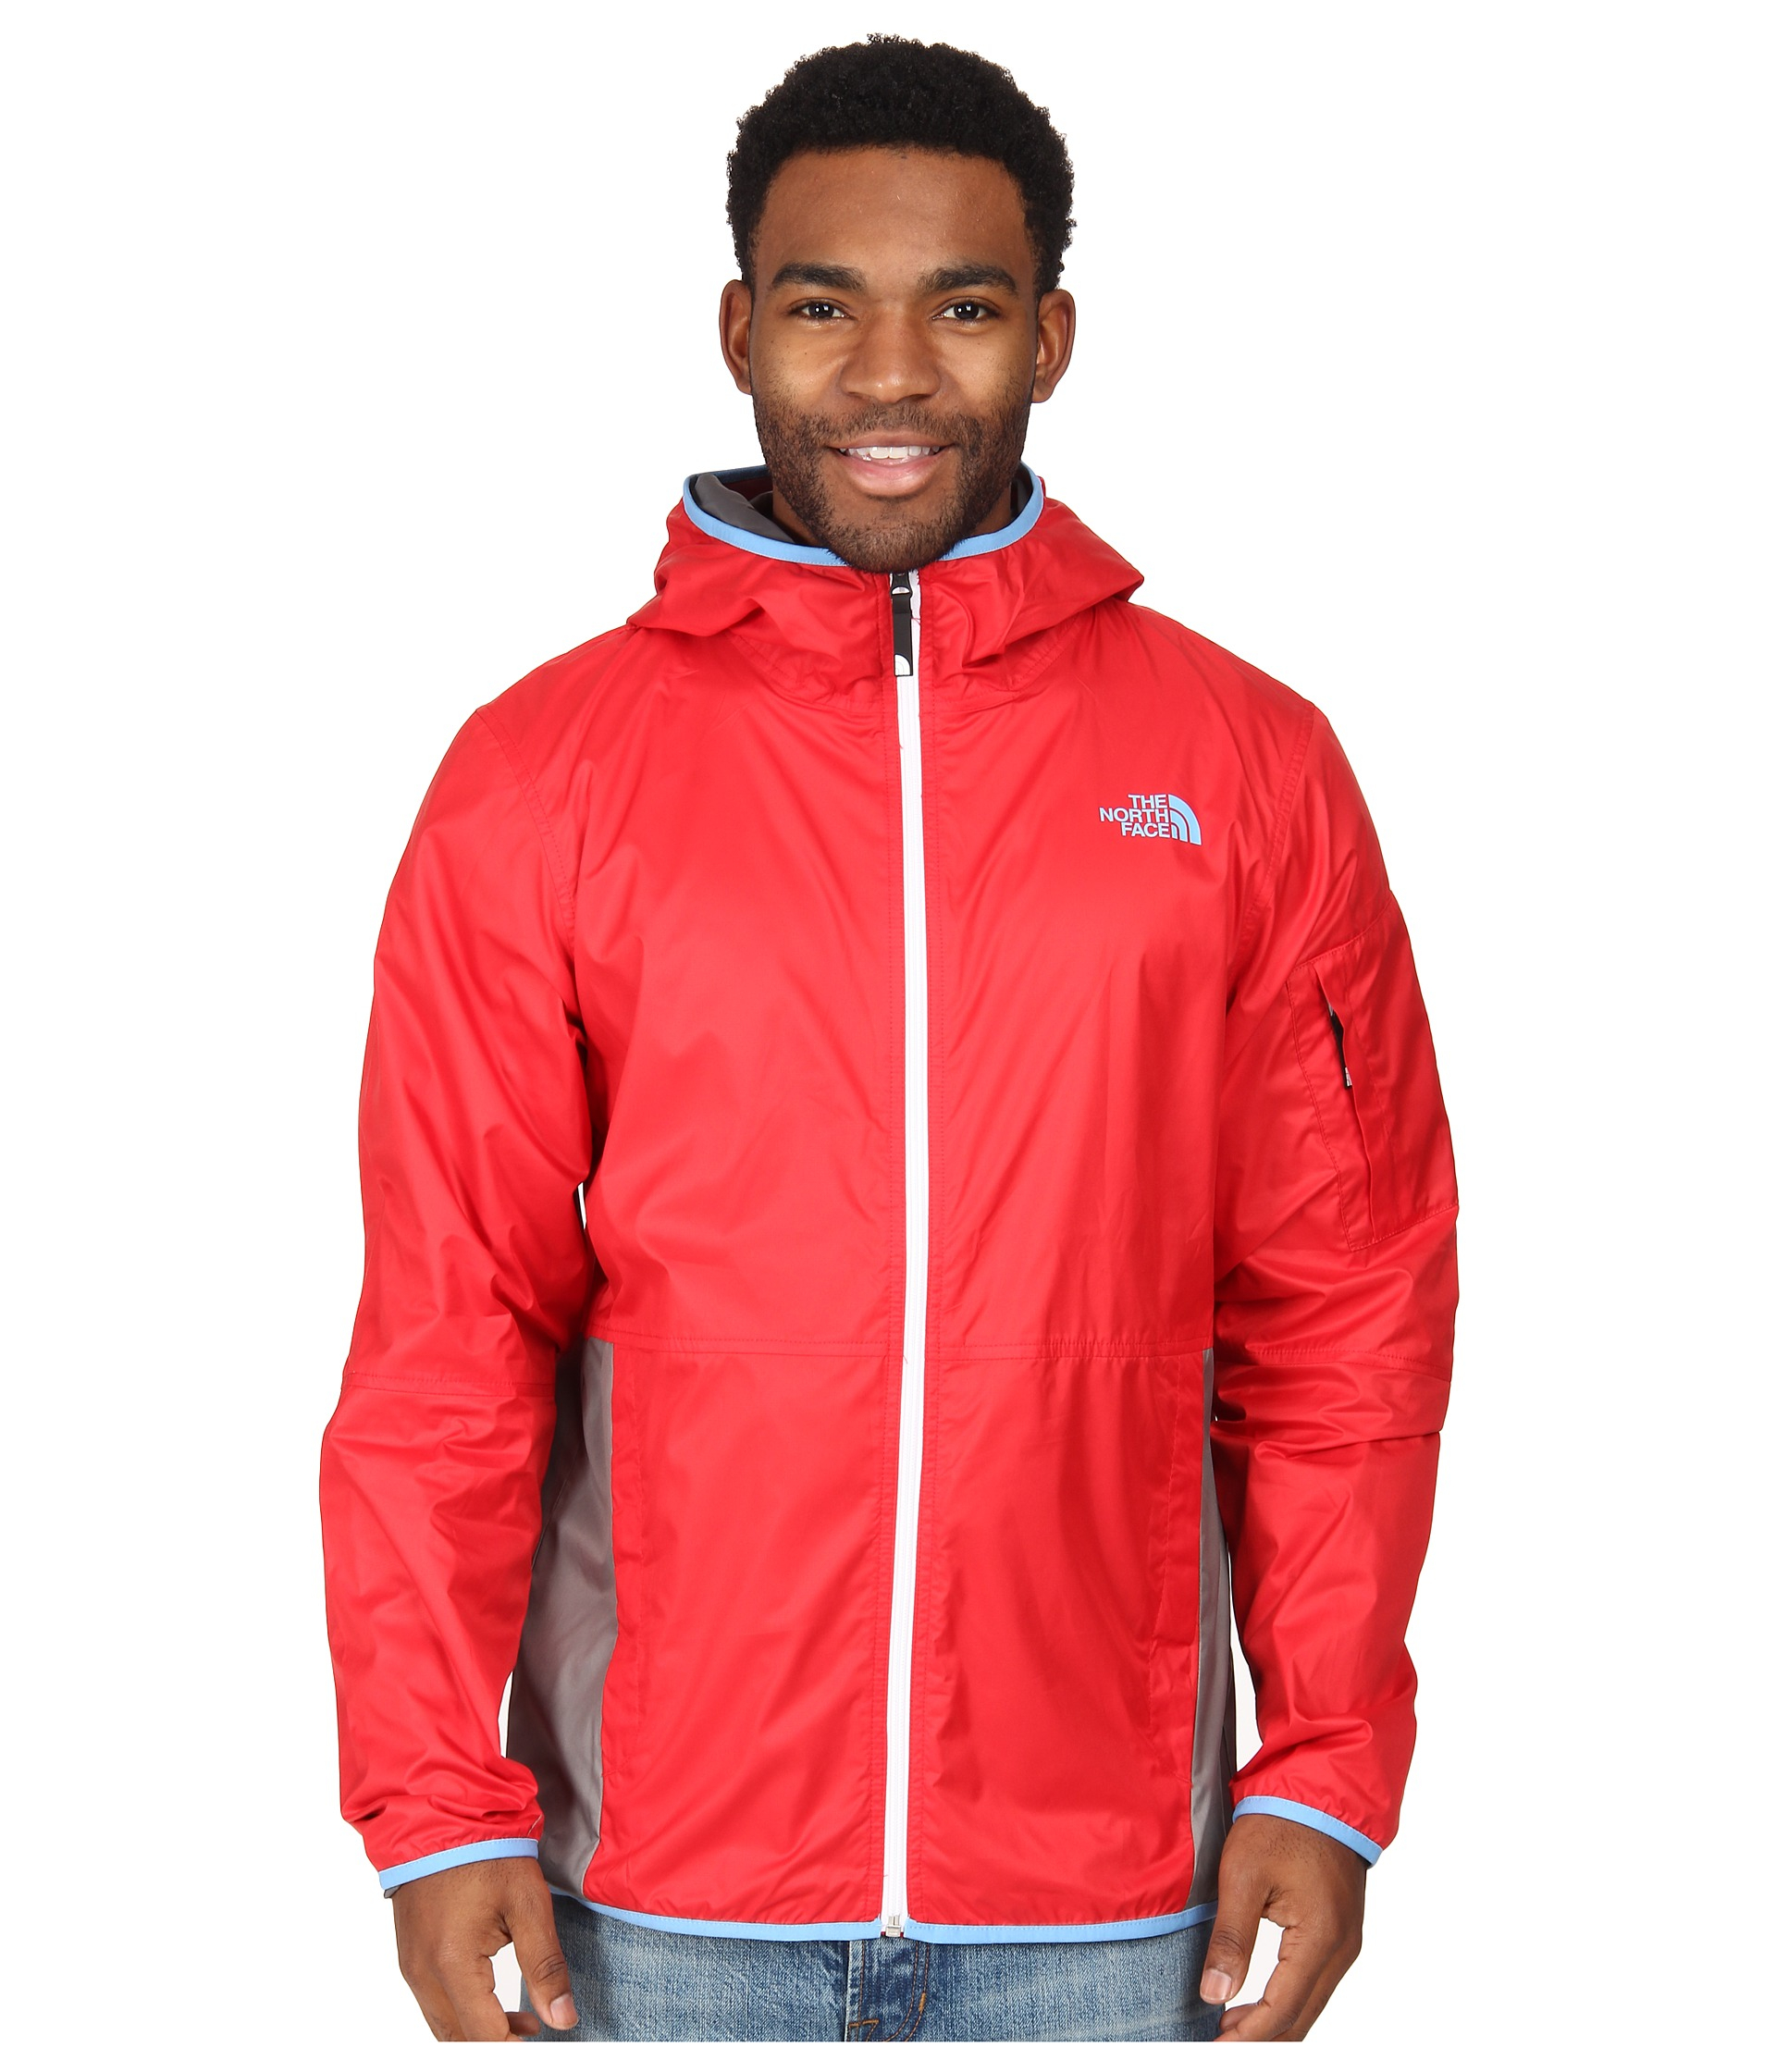 Lyst - The North Face Chicago Wind Jacket in Red for Men